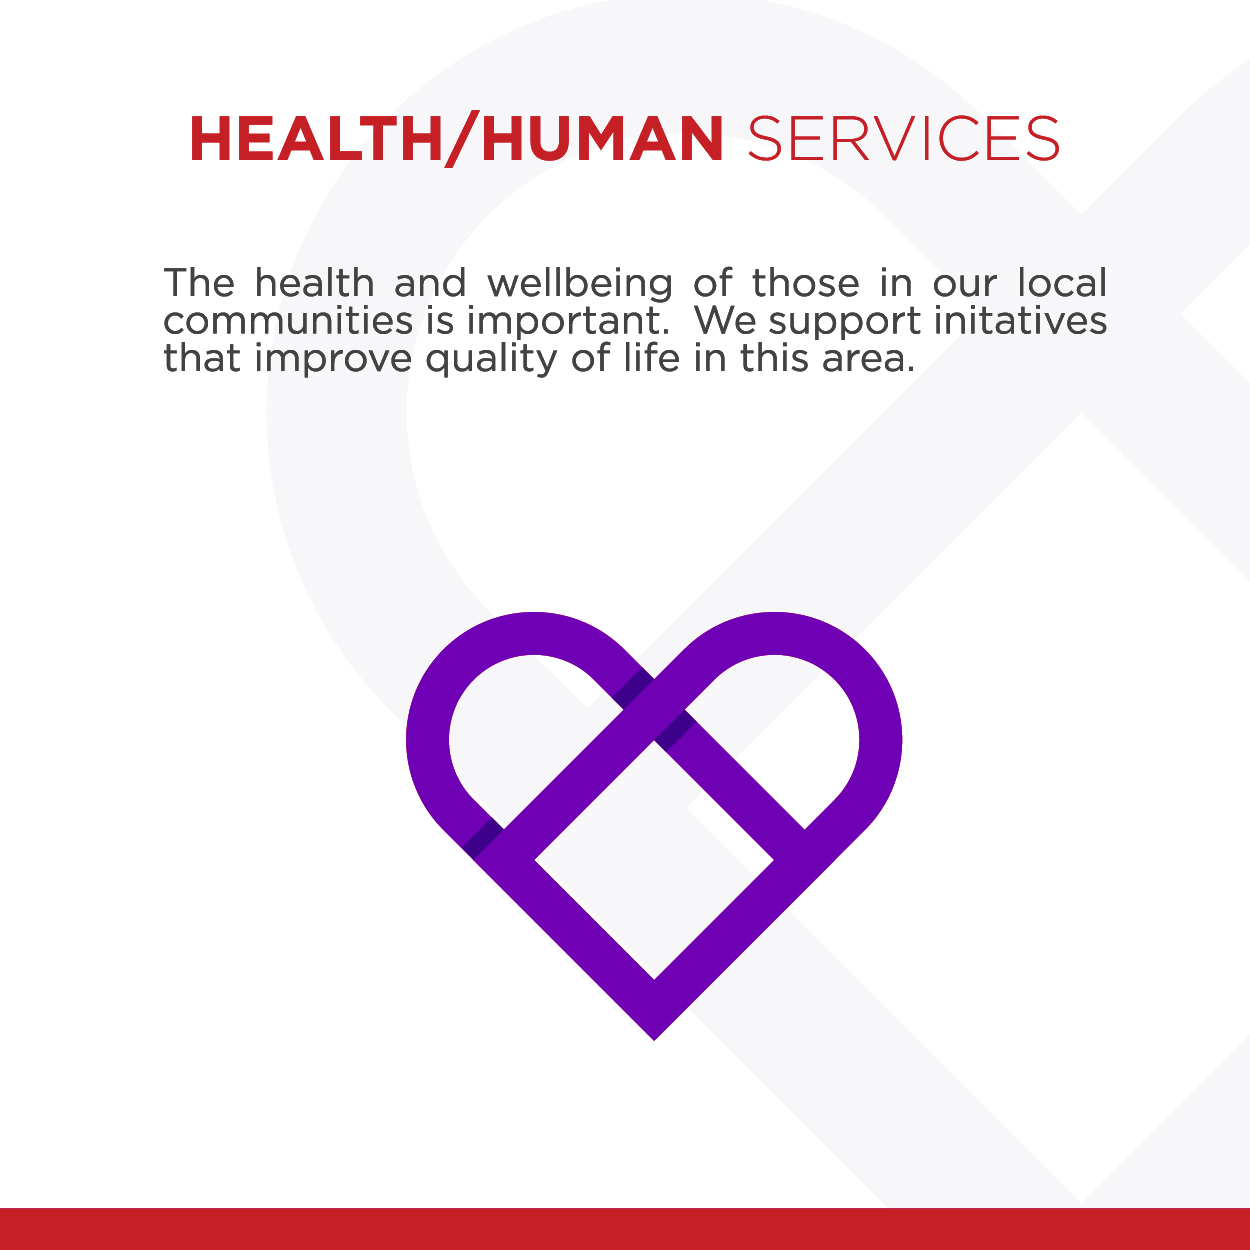 Health/Human Services The health and wellbeing of those in our local communities are important. We support initatives that improve quality of life in this area.